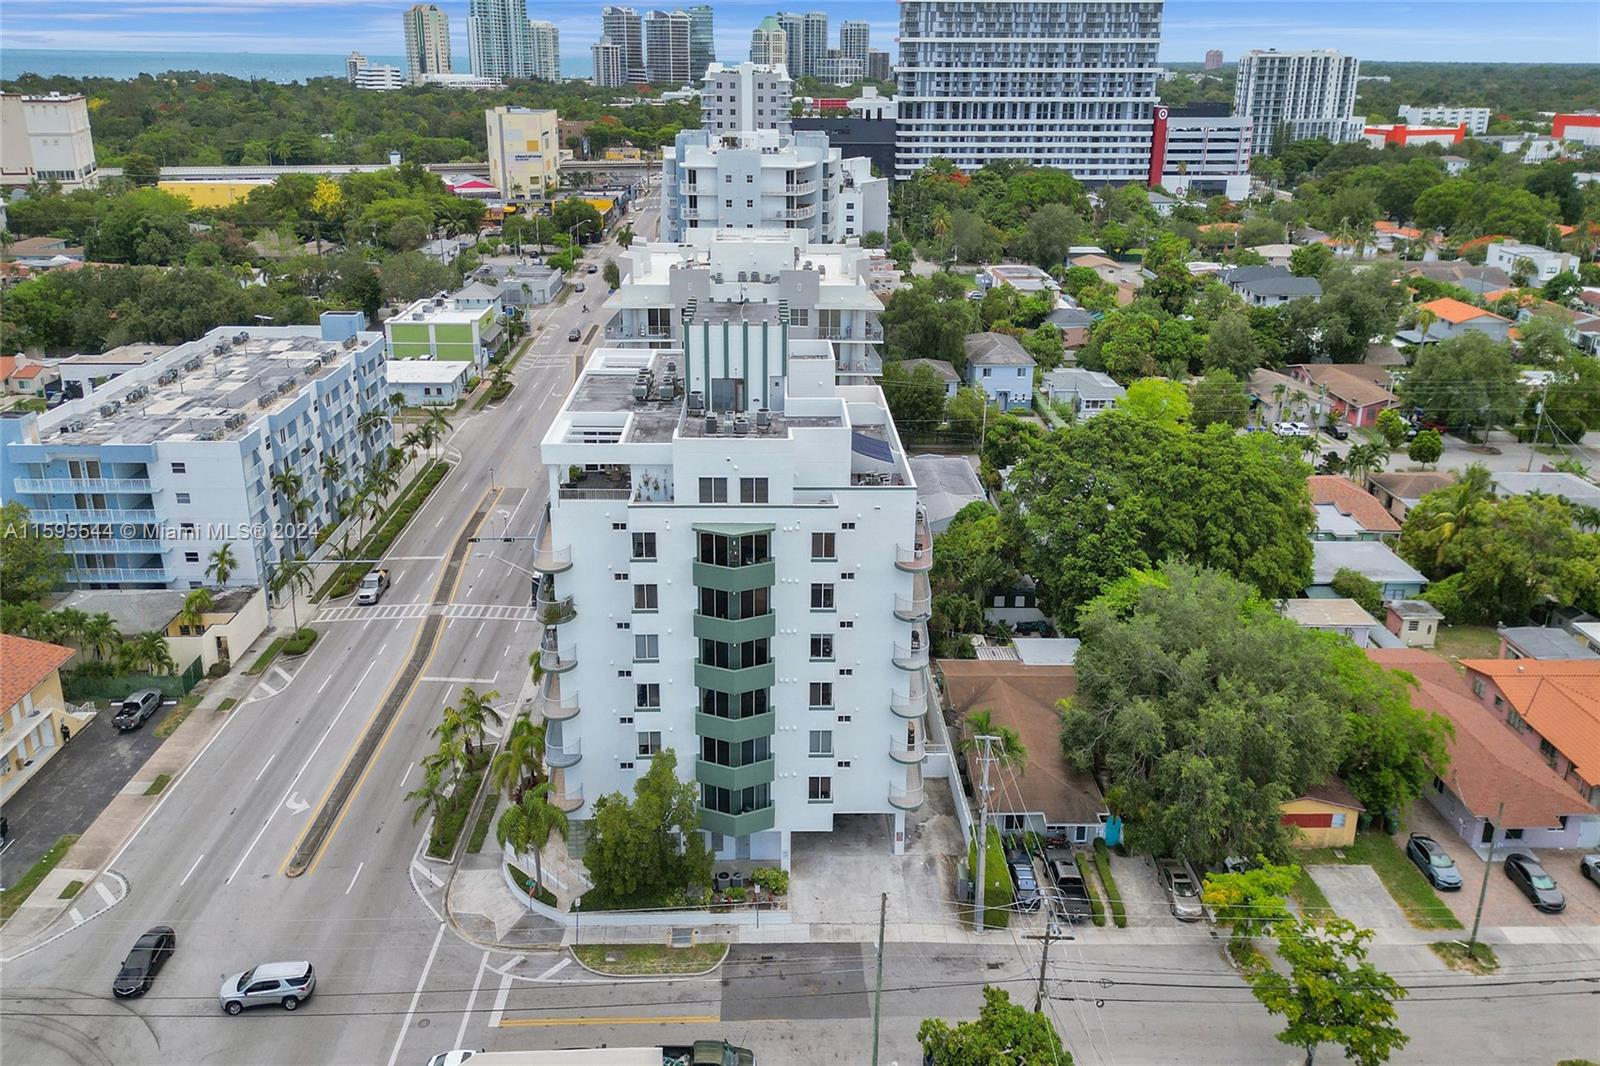 Large 2/2 apartment in quiet boutique condominium (only 38 units) with pool, gym and underground parking. Corner, east-facing unit with Brickell/Downtown views from every room and balcony. Split floor plan allows for privacy. Large eat-in kitchen with granite counter tops, two large windows and sufficient counter and cabinet space, new high-end appliances, laundry closet in kitchen. Hard wood floors in perfect condition. Walk-in closet in principal bedroom, lots of closet space.
Convenient, quiet and central location, three short blocks away from the Grove Central Metrorail station and its new shops (Target, Sprouts, Total Wine, etc).  Two Metro stops to Brickell and four to Dadeland. Walking distance to downtown Coconut Grove and Coral Way, close to Coral Gables' Miracle Mile.